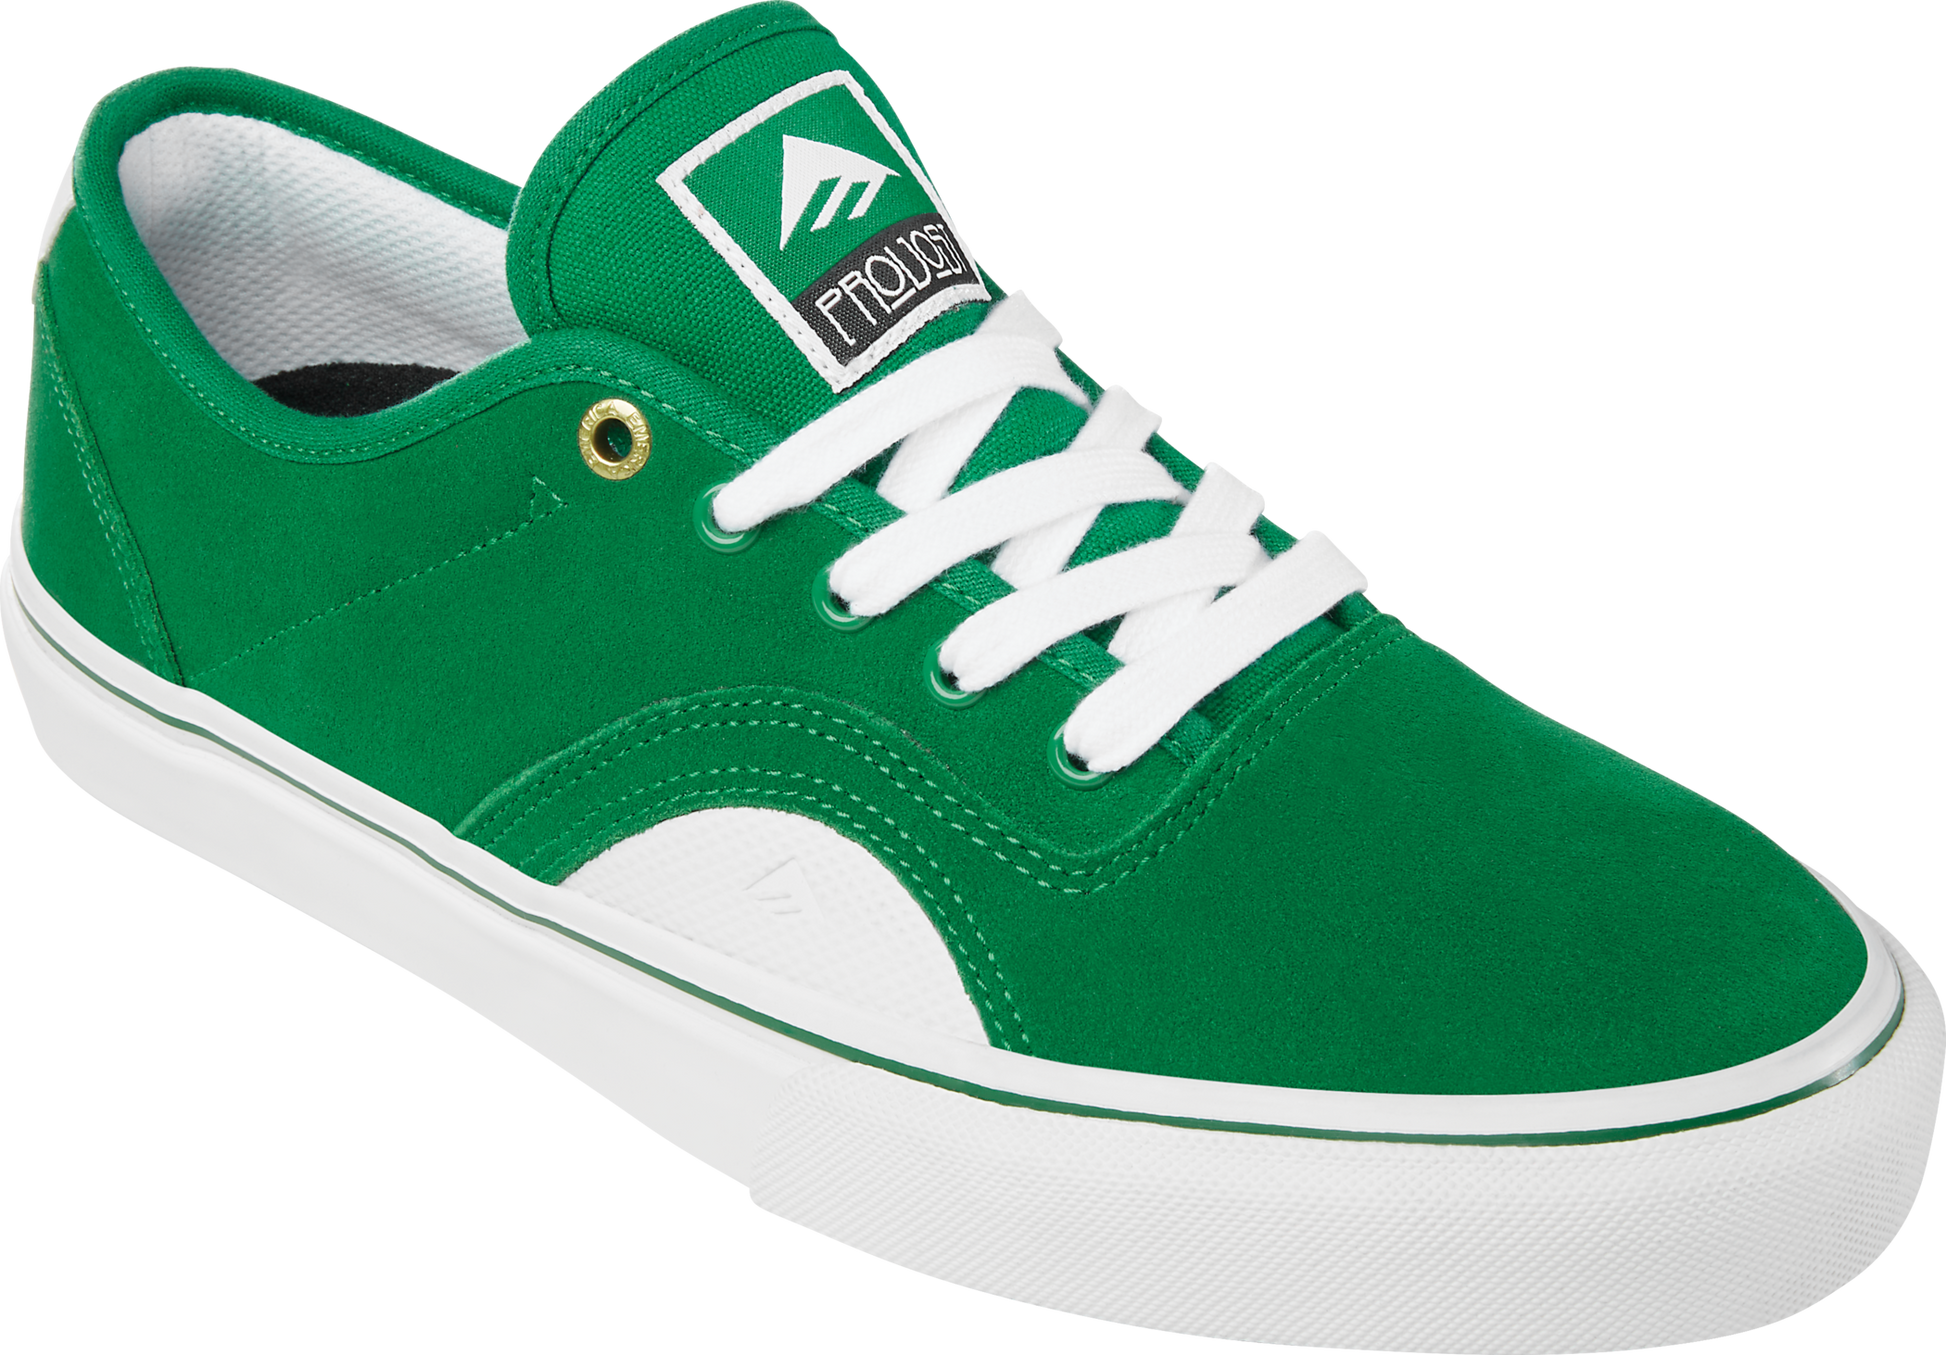 Emerica Mens Provost G6 Green Shoes